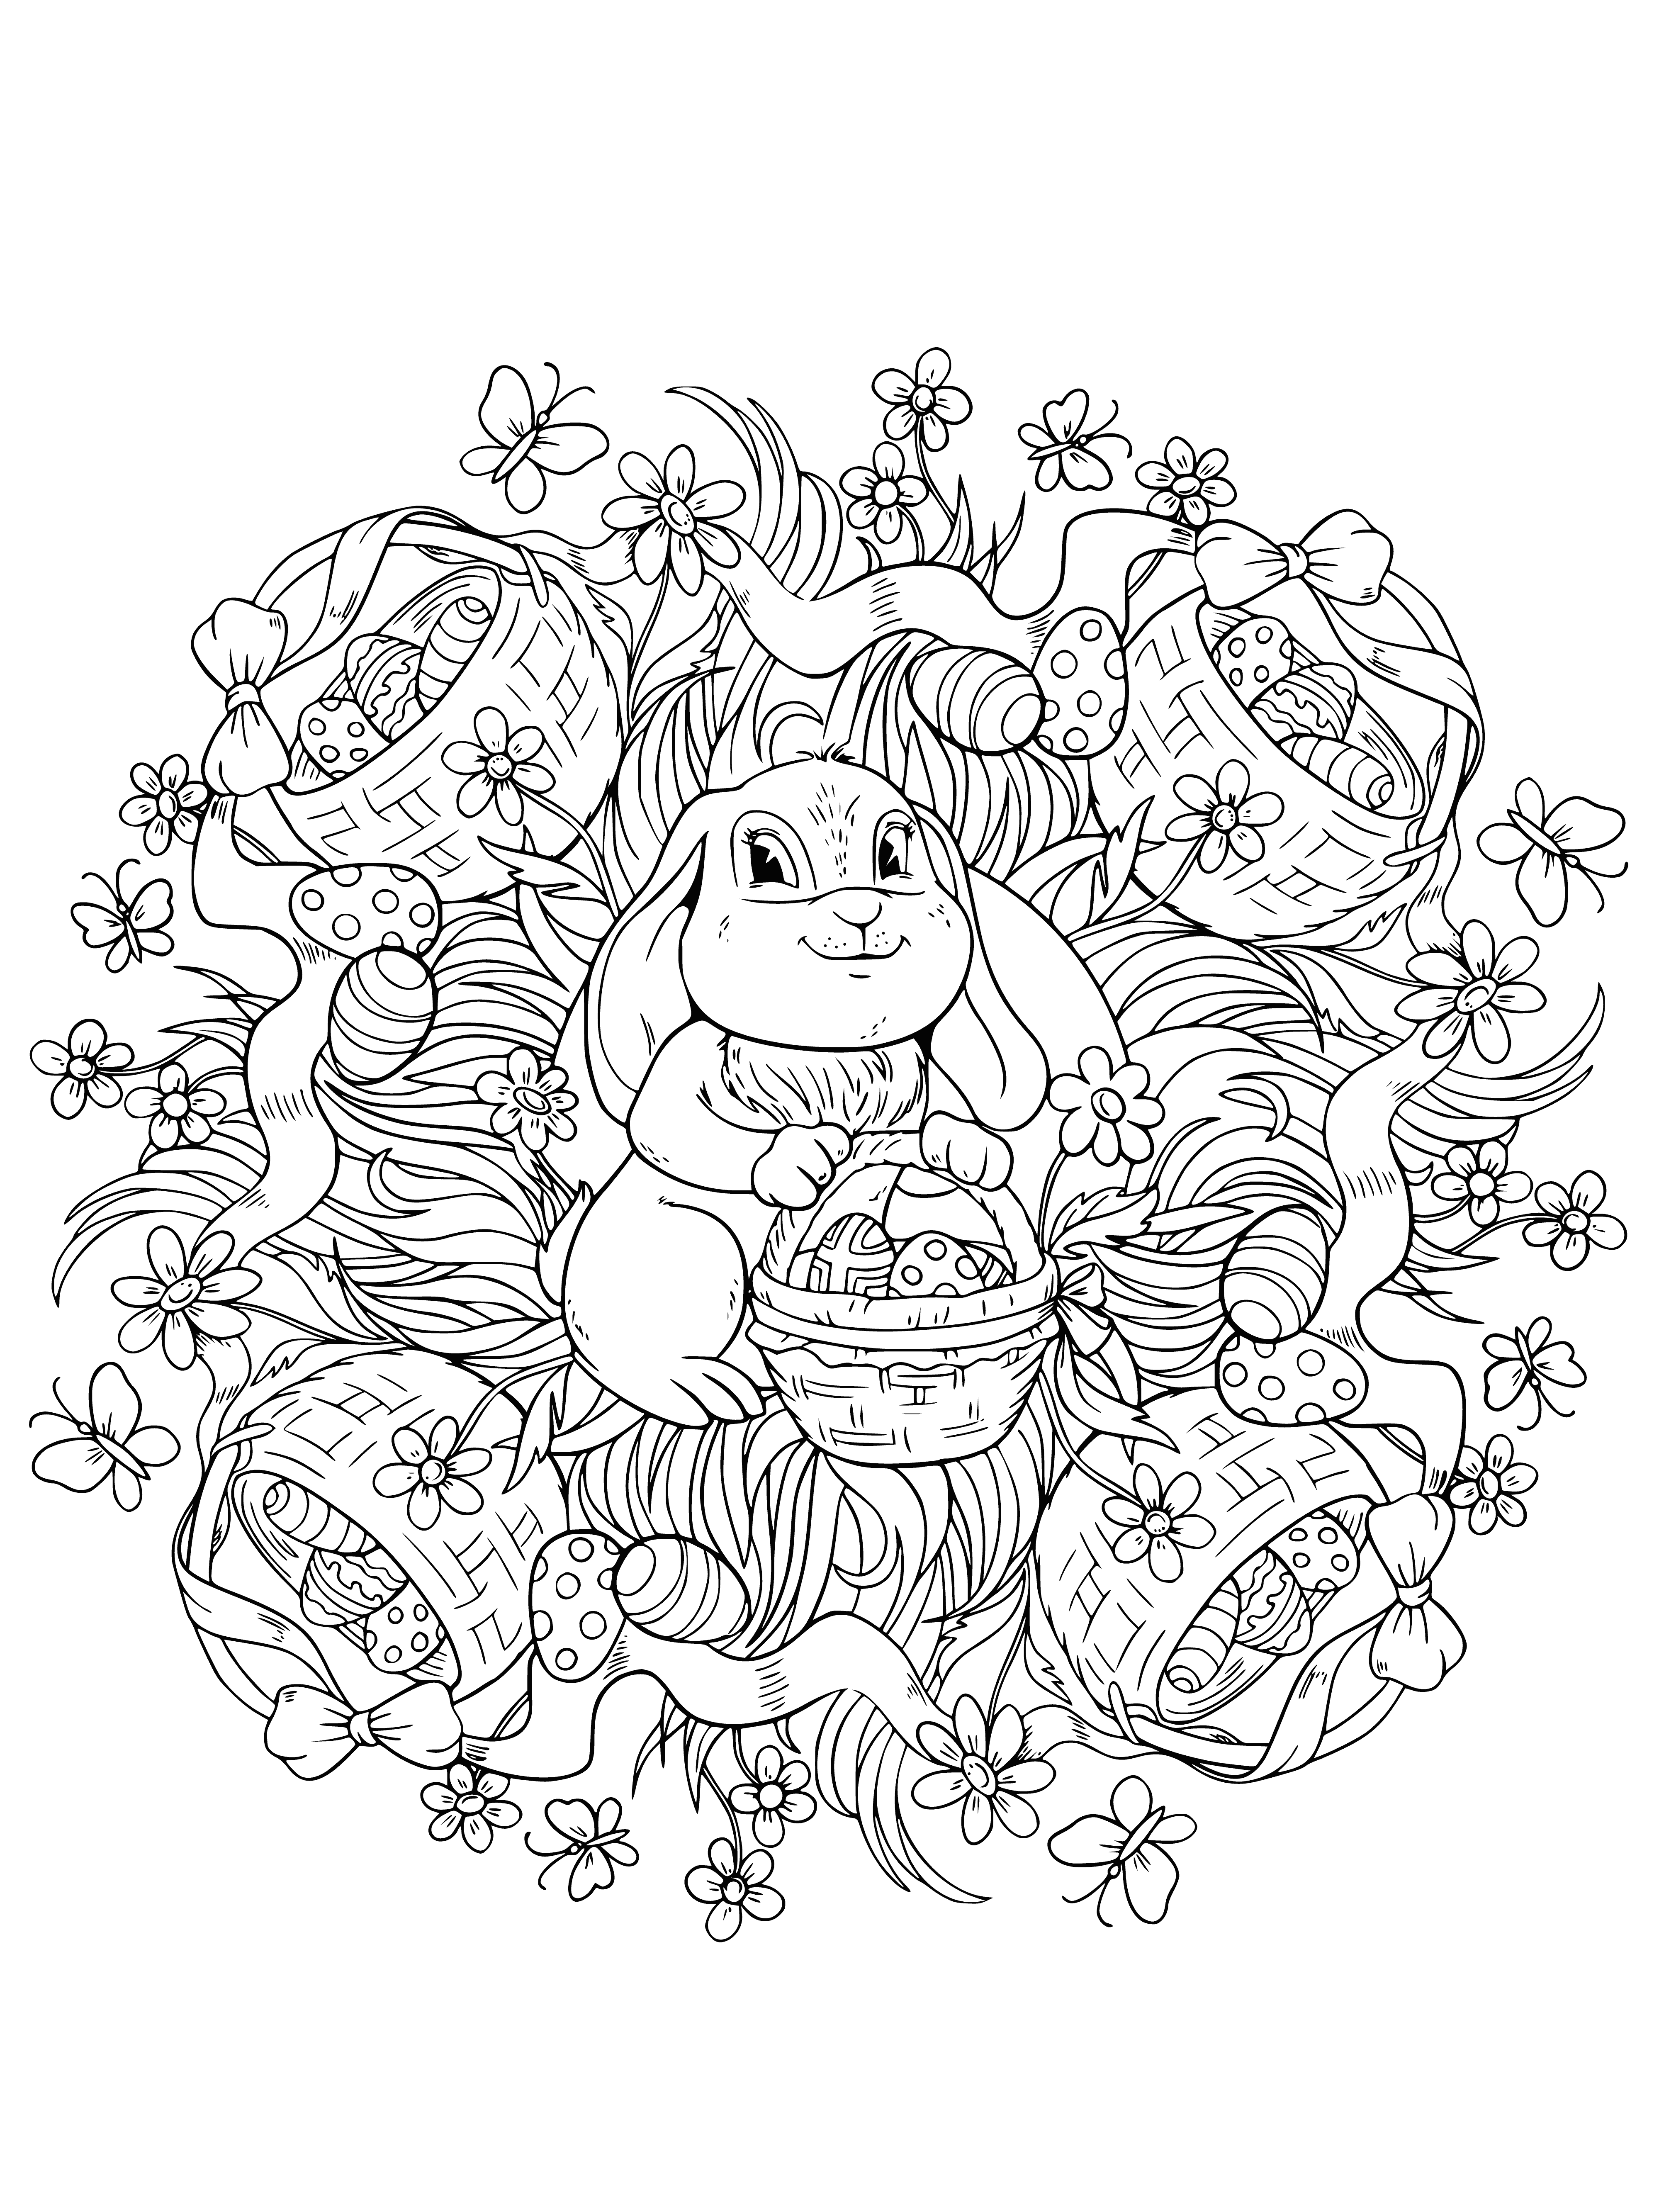 coloring page: The Easter bunny hops across the page with eggs & spring flowers, a butterfly flits nearby.